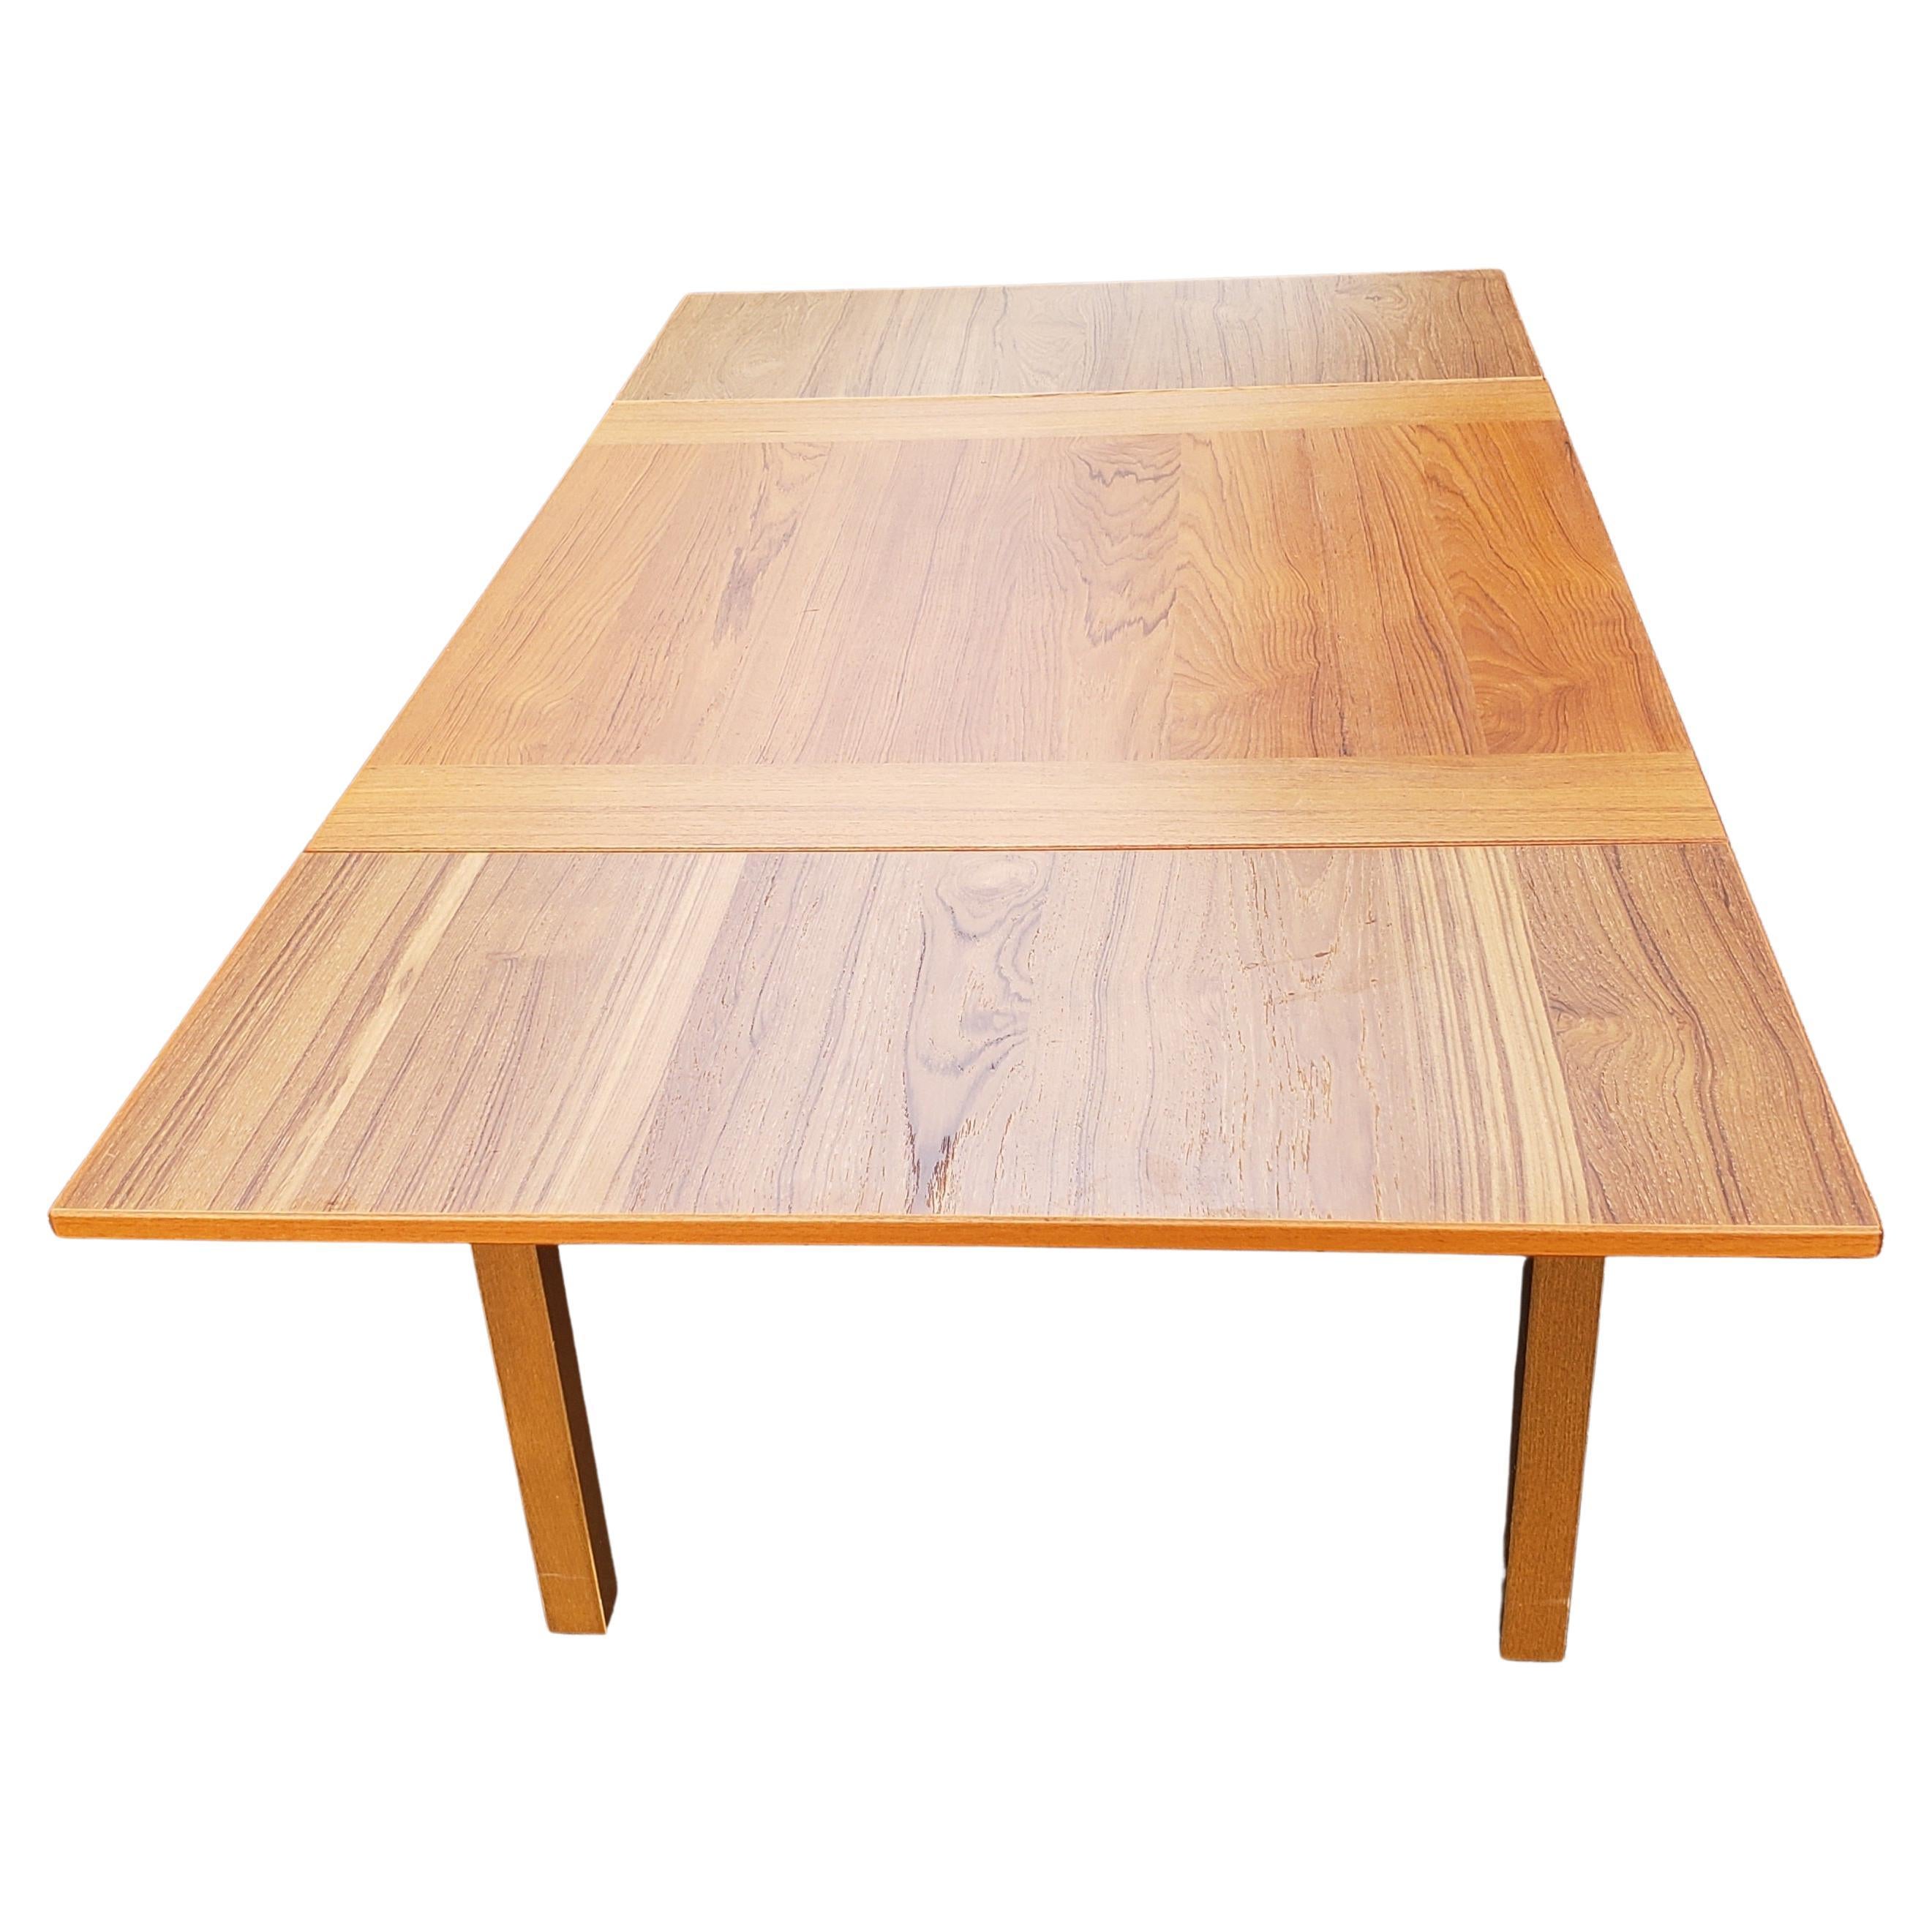 Elegant 21st century 100% teak dining table attributed to Gudme Møbelfabik in Denmark. 
This table is made out of teak wood and comes with tapered legs and two hidden pull out leaves that can be used to extend the table to 65.5